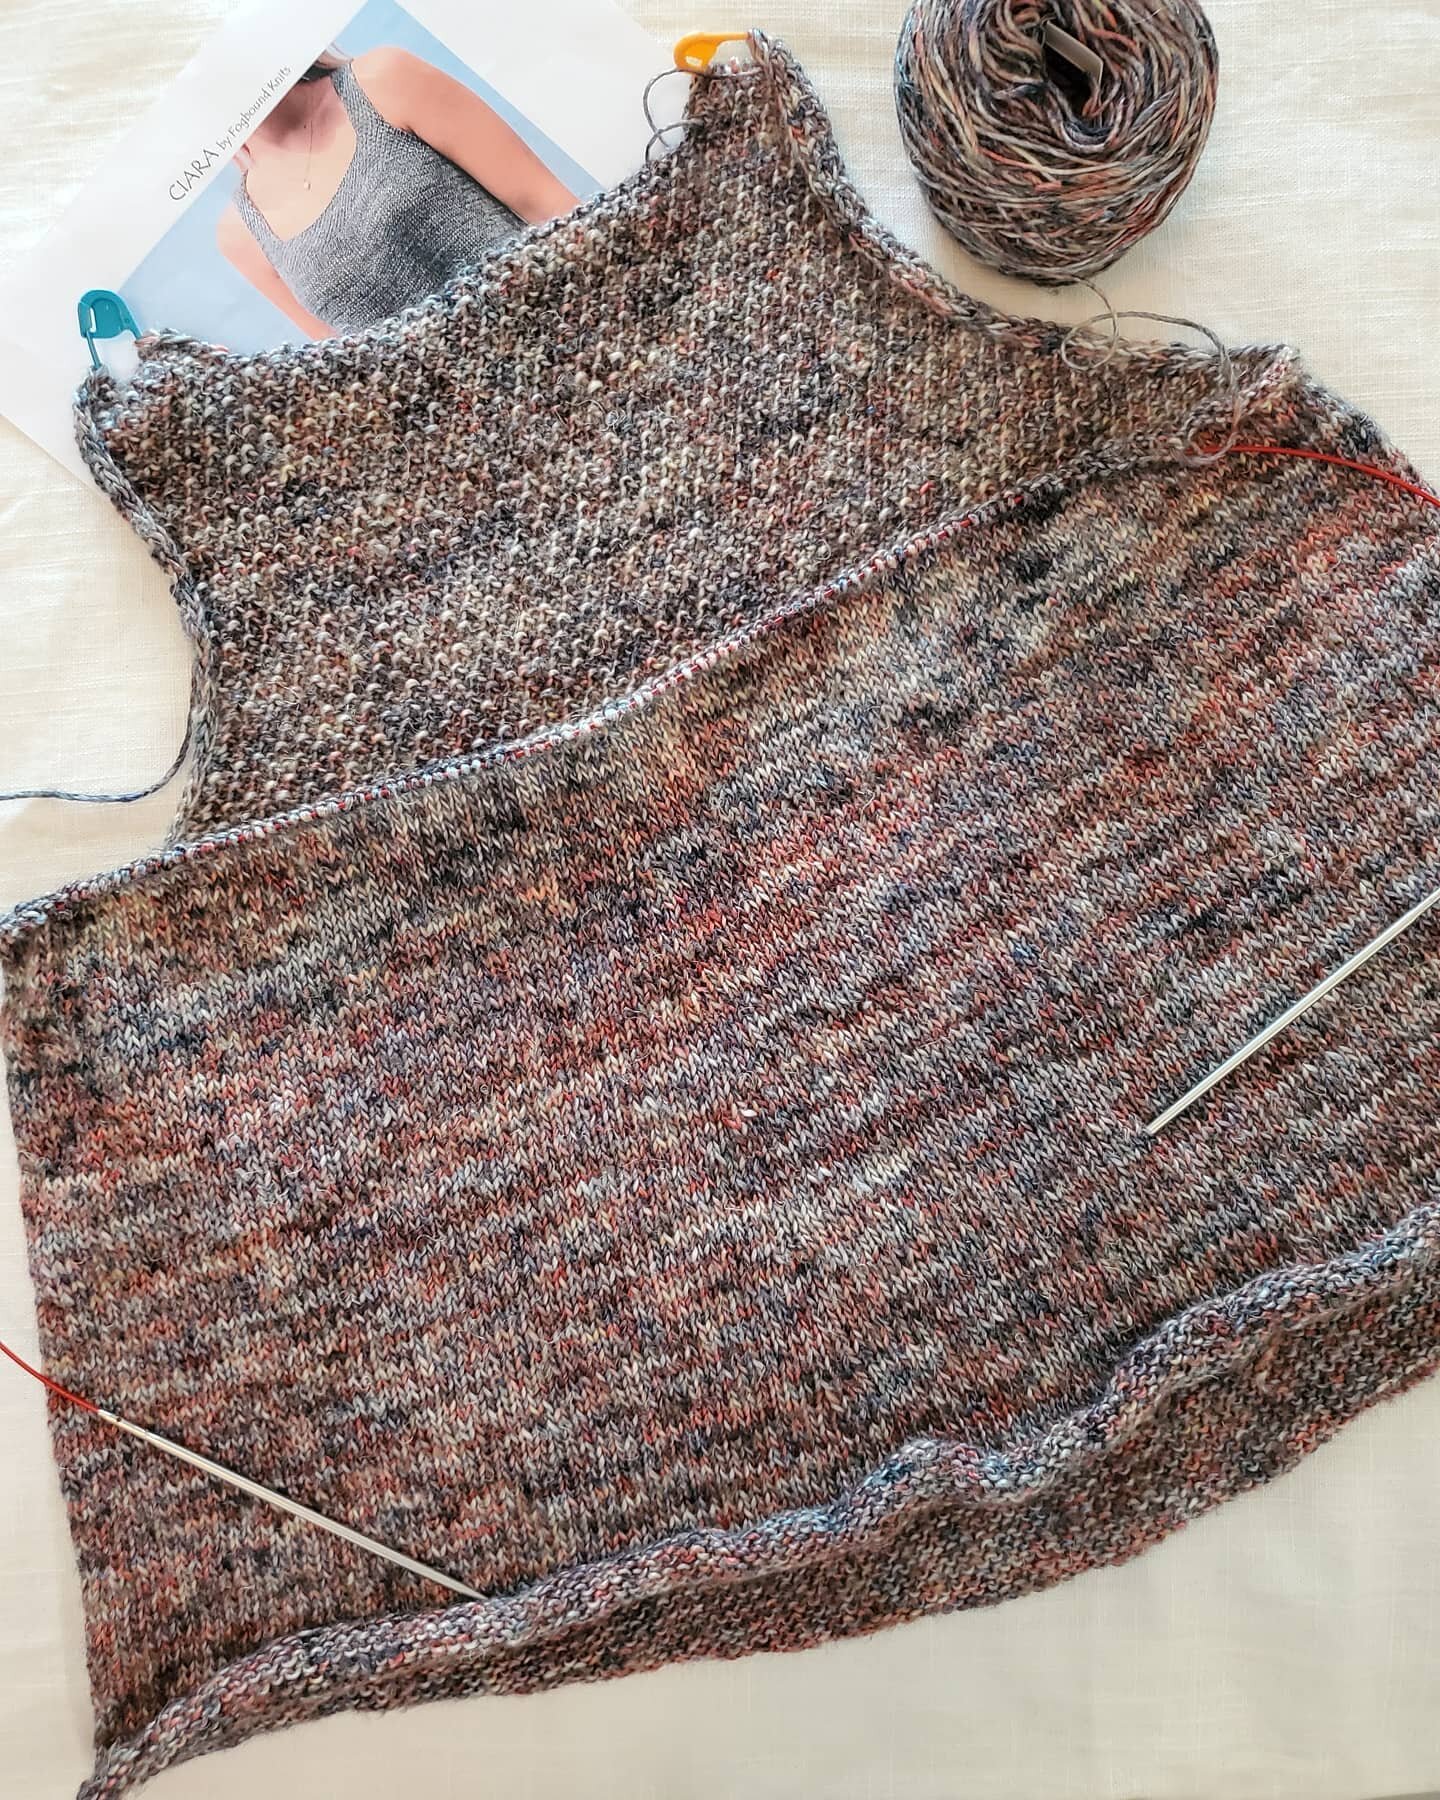 Ciara tank progress! The back is complete, now on to the front and almost done! 🤩 @1mesherri1 is really looking forward to wearing it very soon! Working this up in @malabrigoyarn Susurro is a dream! 🌈 This colorway is 🔥Fire Agate... 🥰 Susurro is 